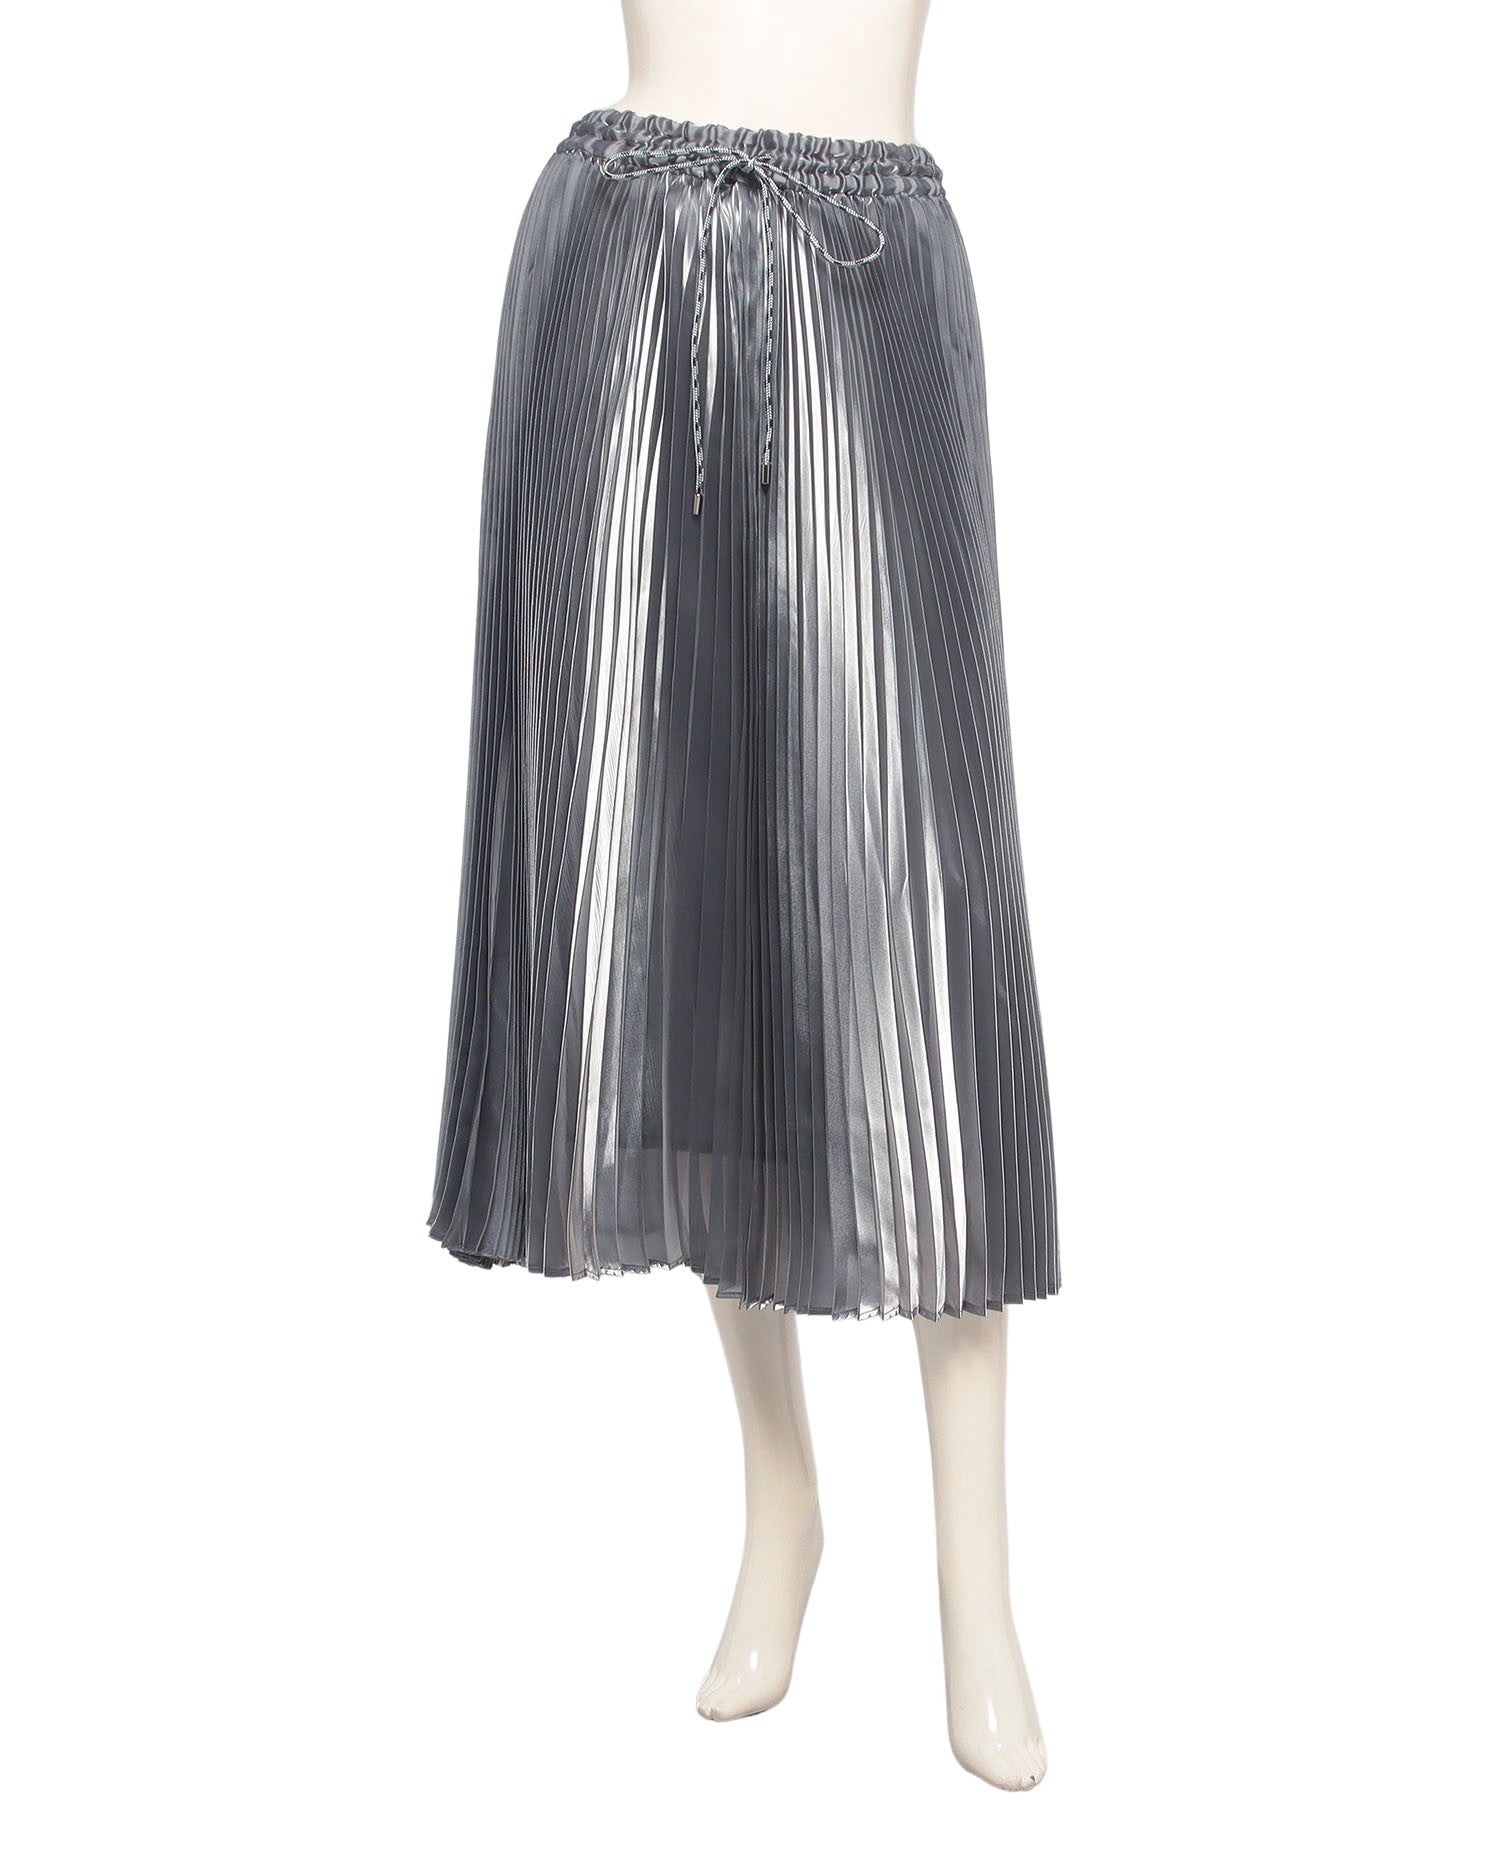 [Sales for limited quantity] Bright chambray pleated skirt